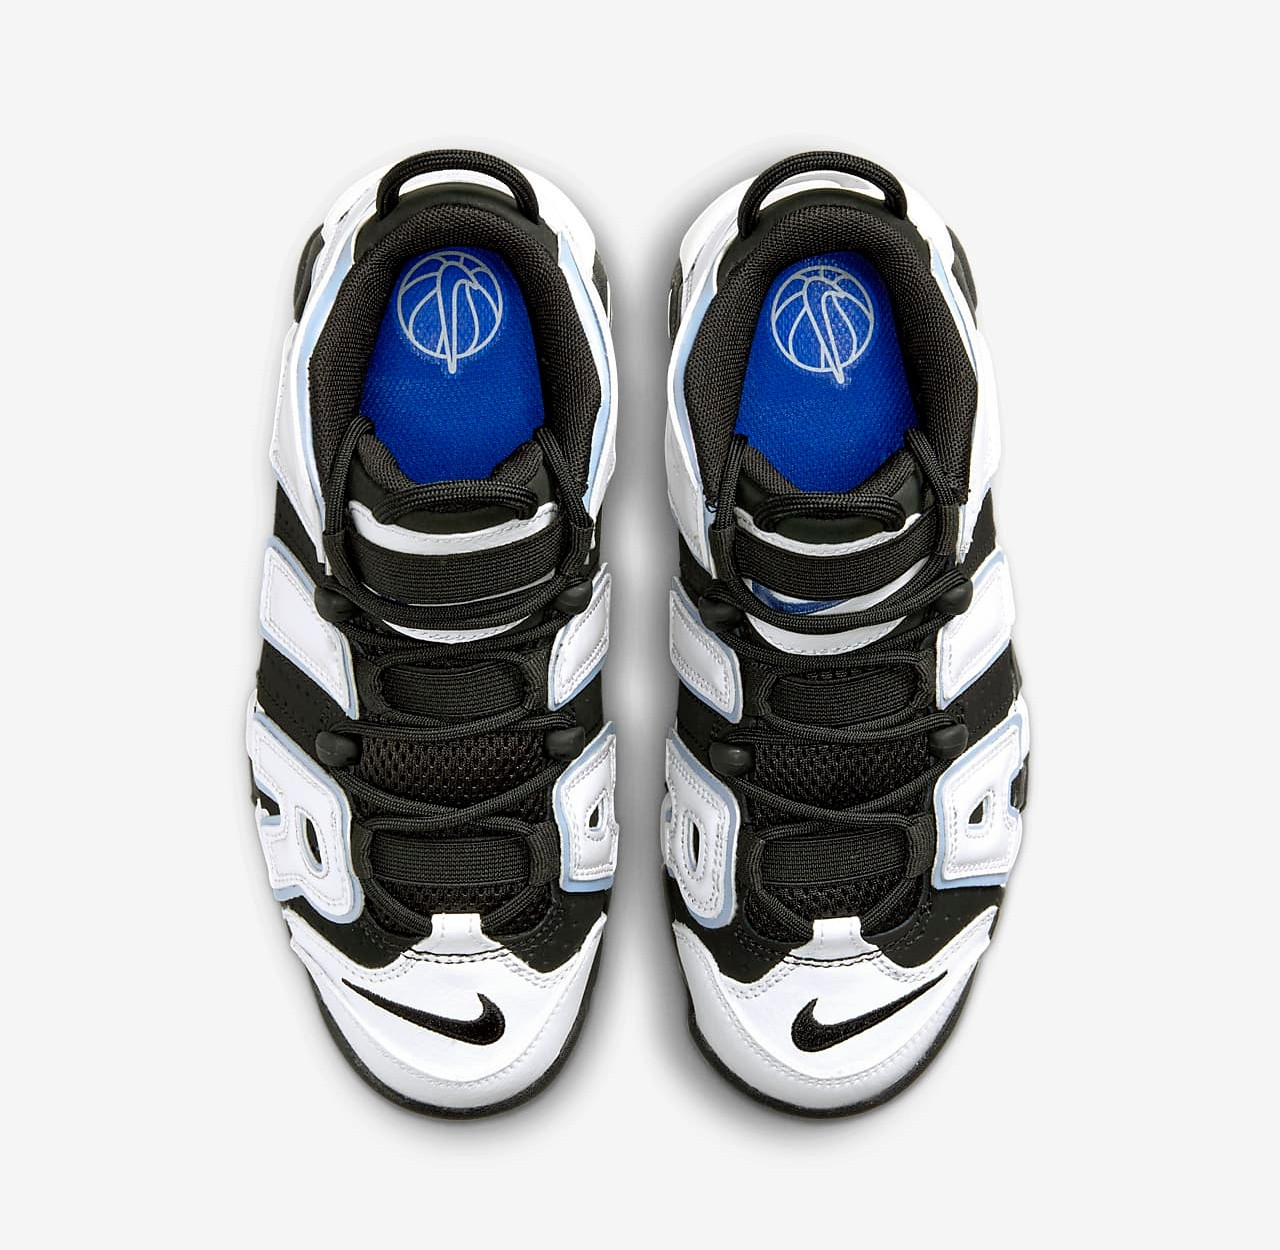 Nike Air More Uptempo '96 sneakers in black and white - BLACK